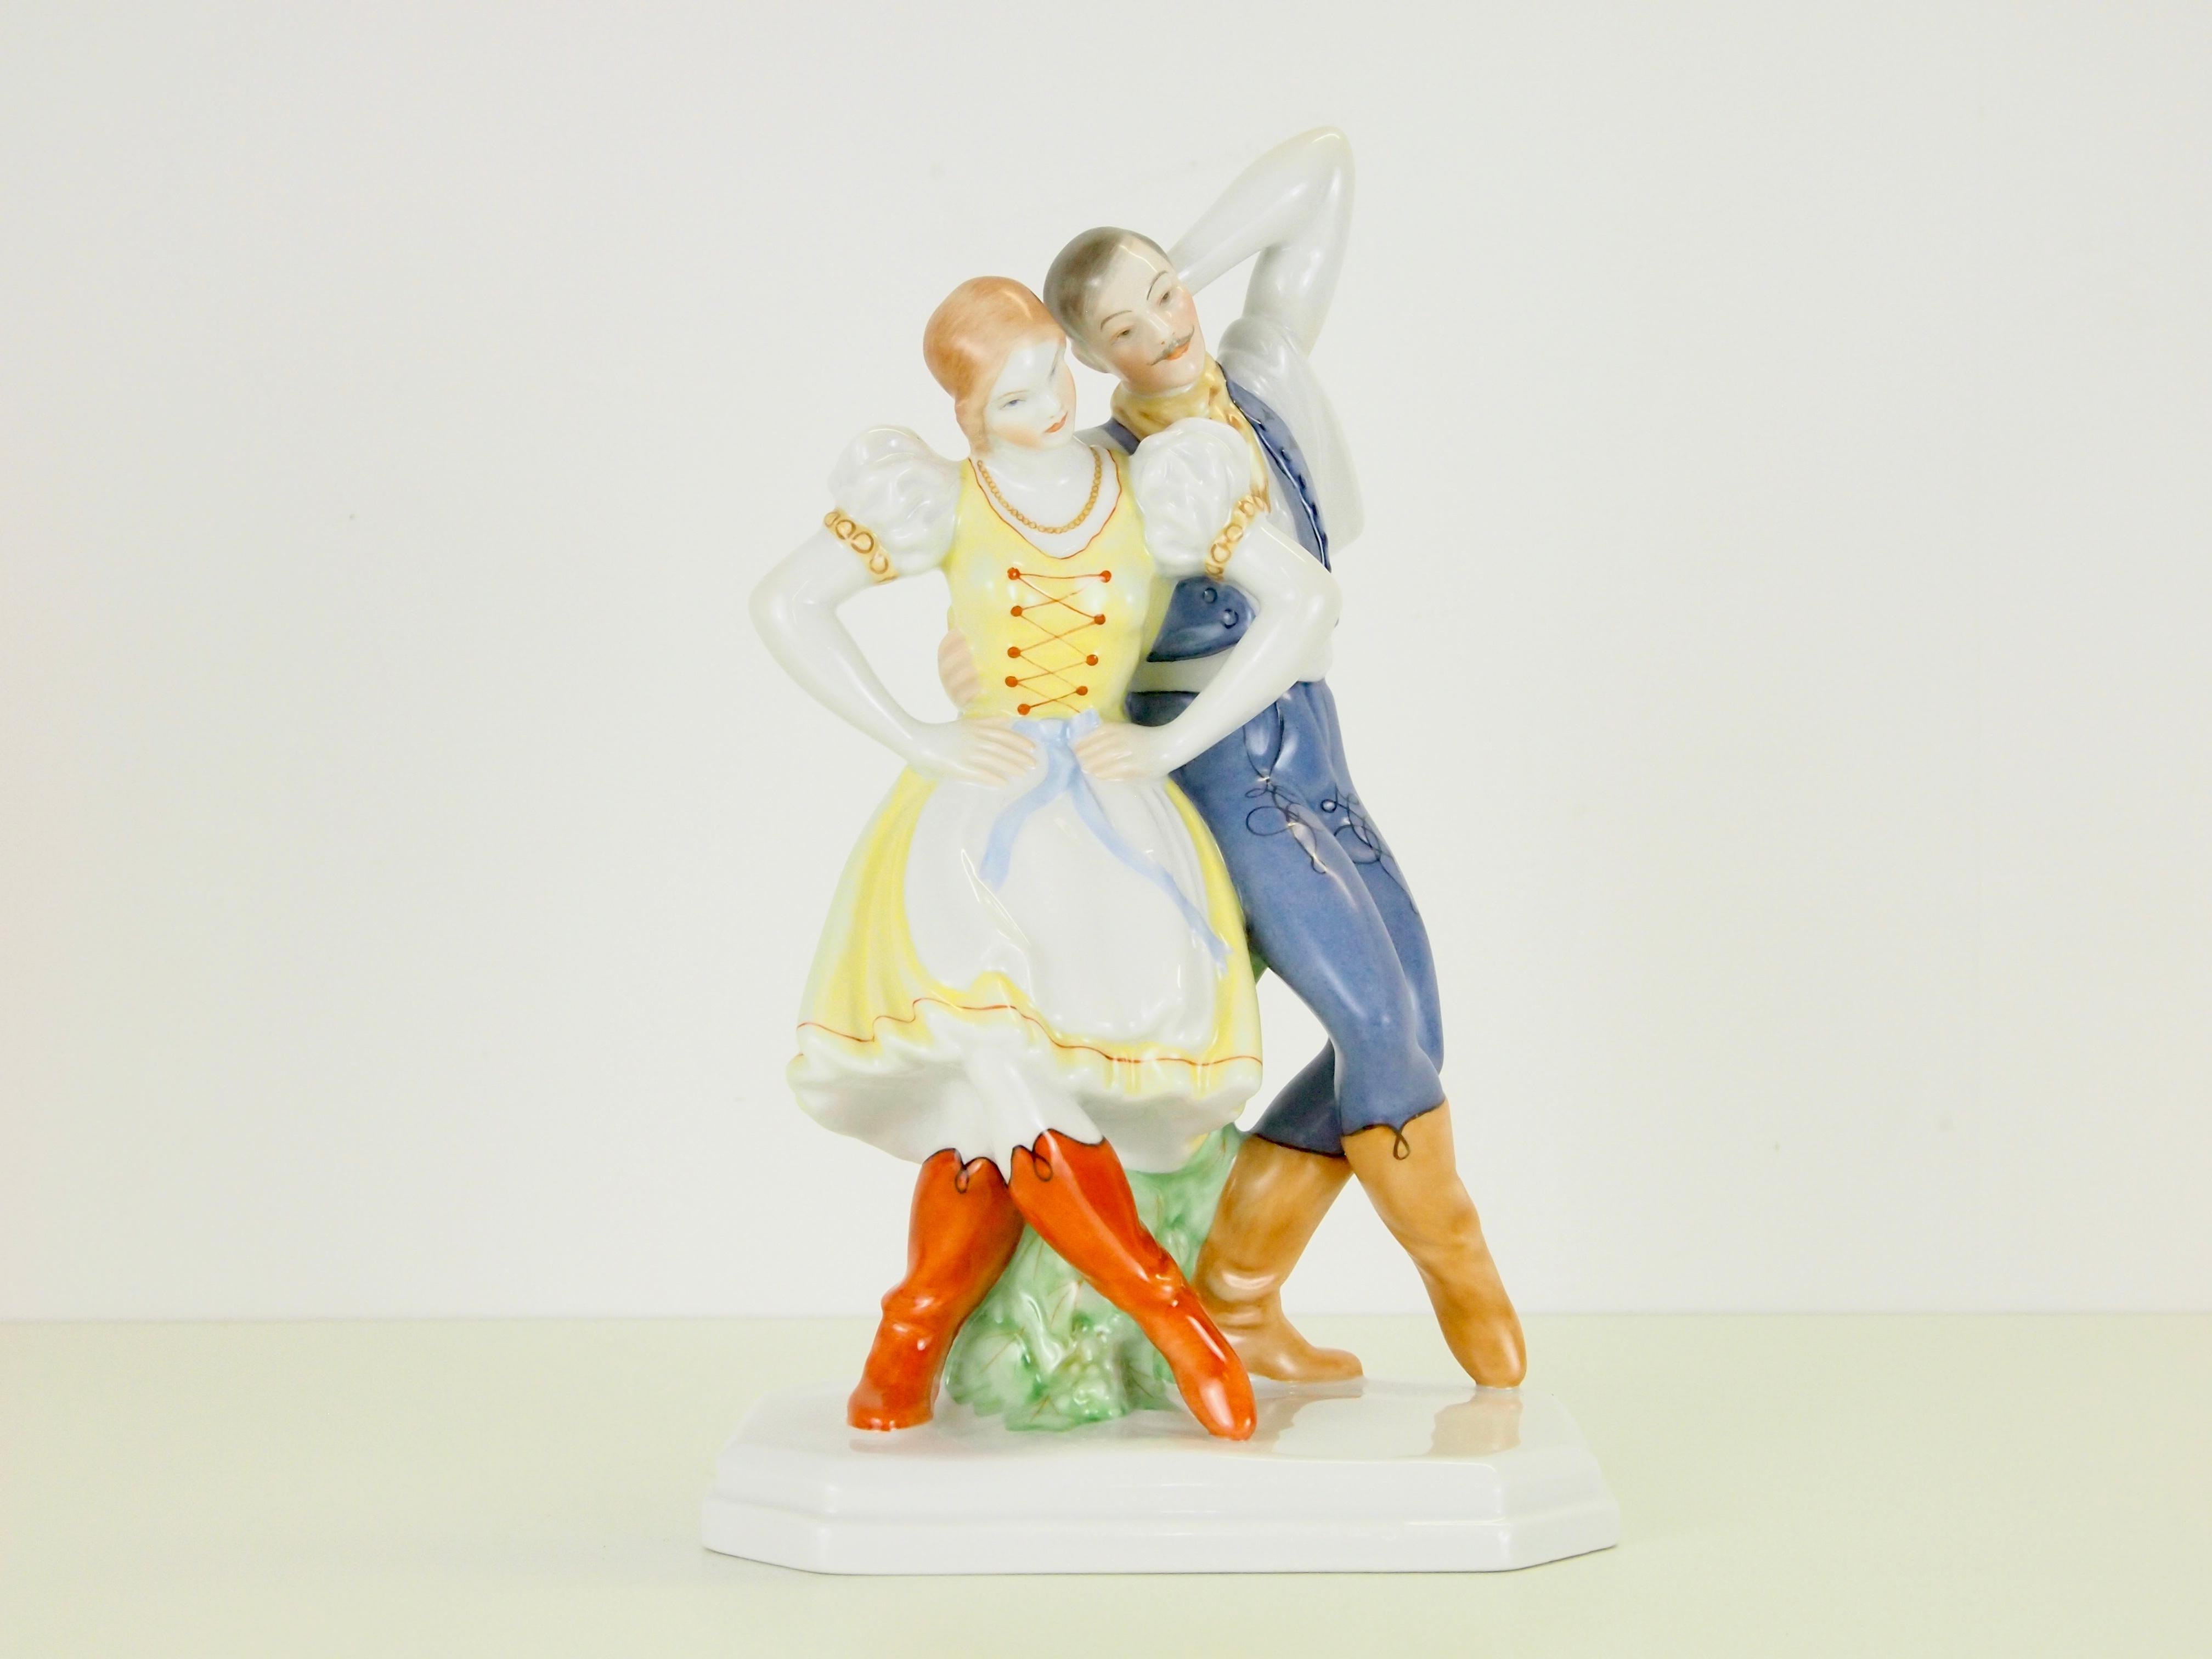 Delicate vintage porcelain statuette depicting a romantic dancing couple manufactured by Herend Hungary.

Herend was founded in 1826 and has had much famous customers who bought it's porcelain. At the first World's Fair the porcelain manufacturer